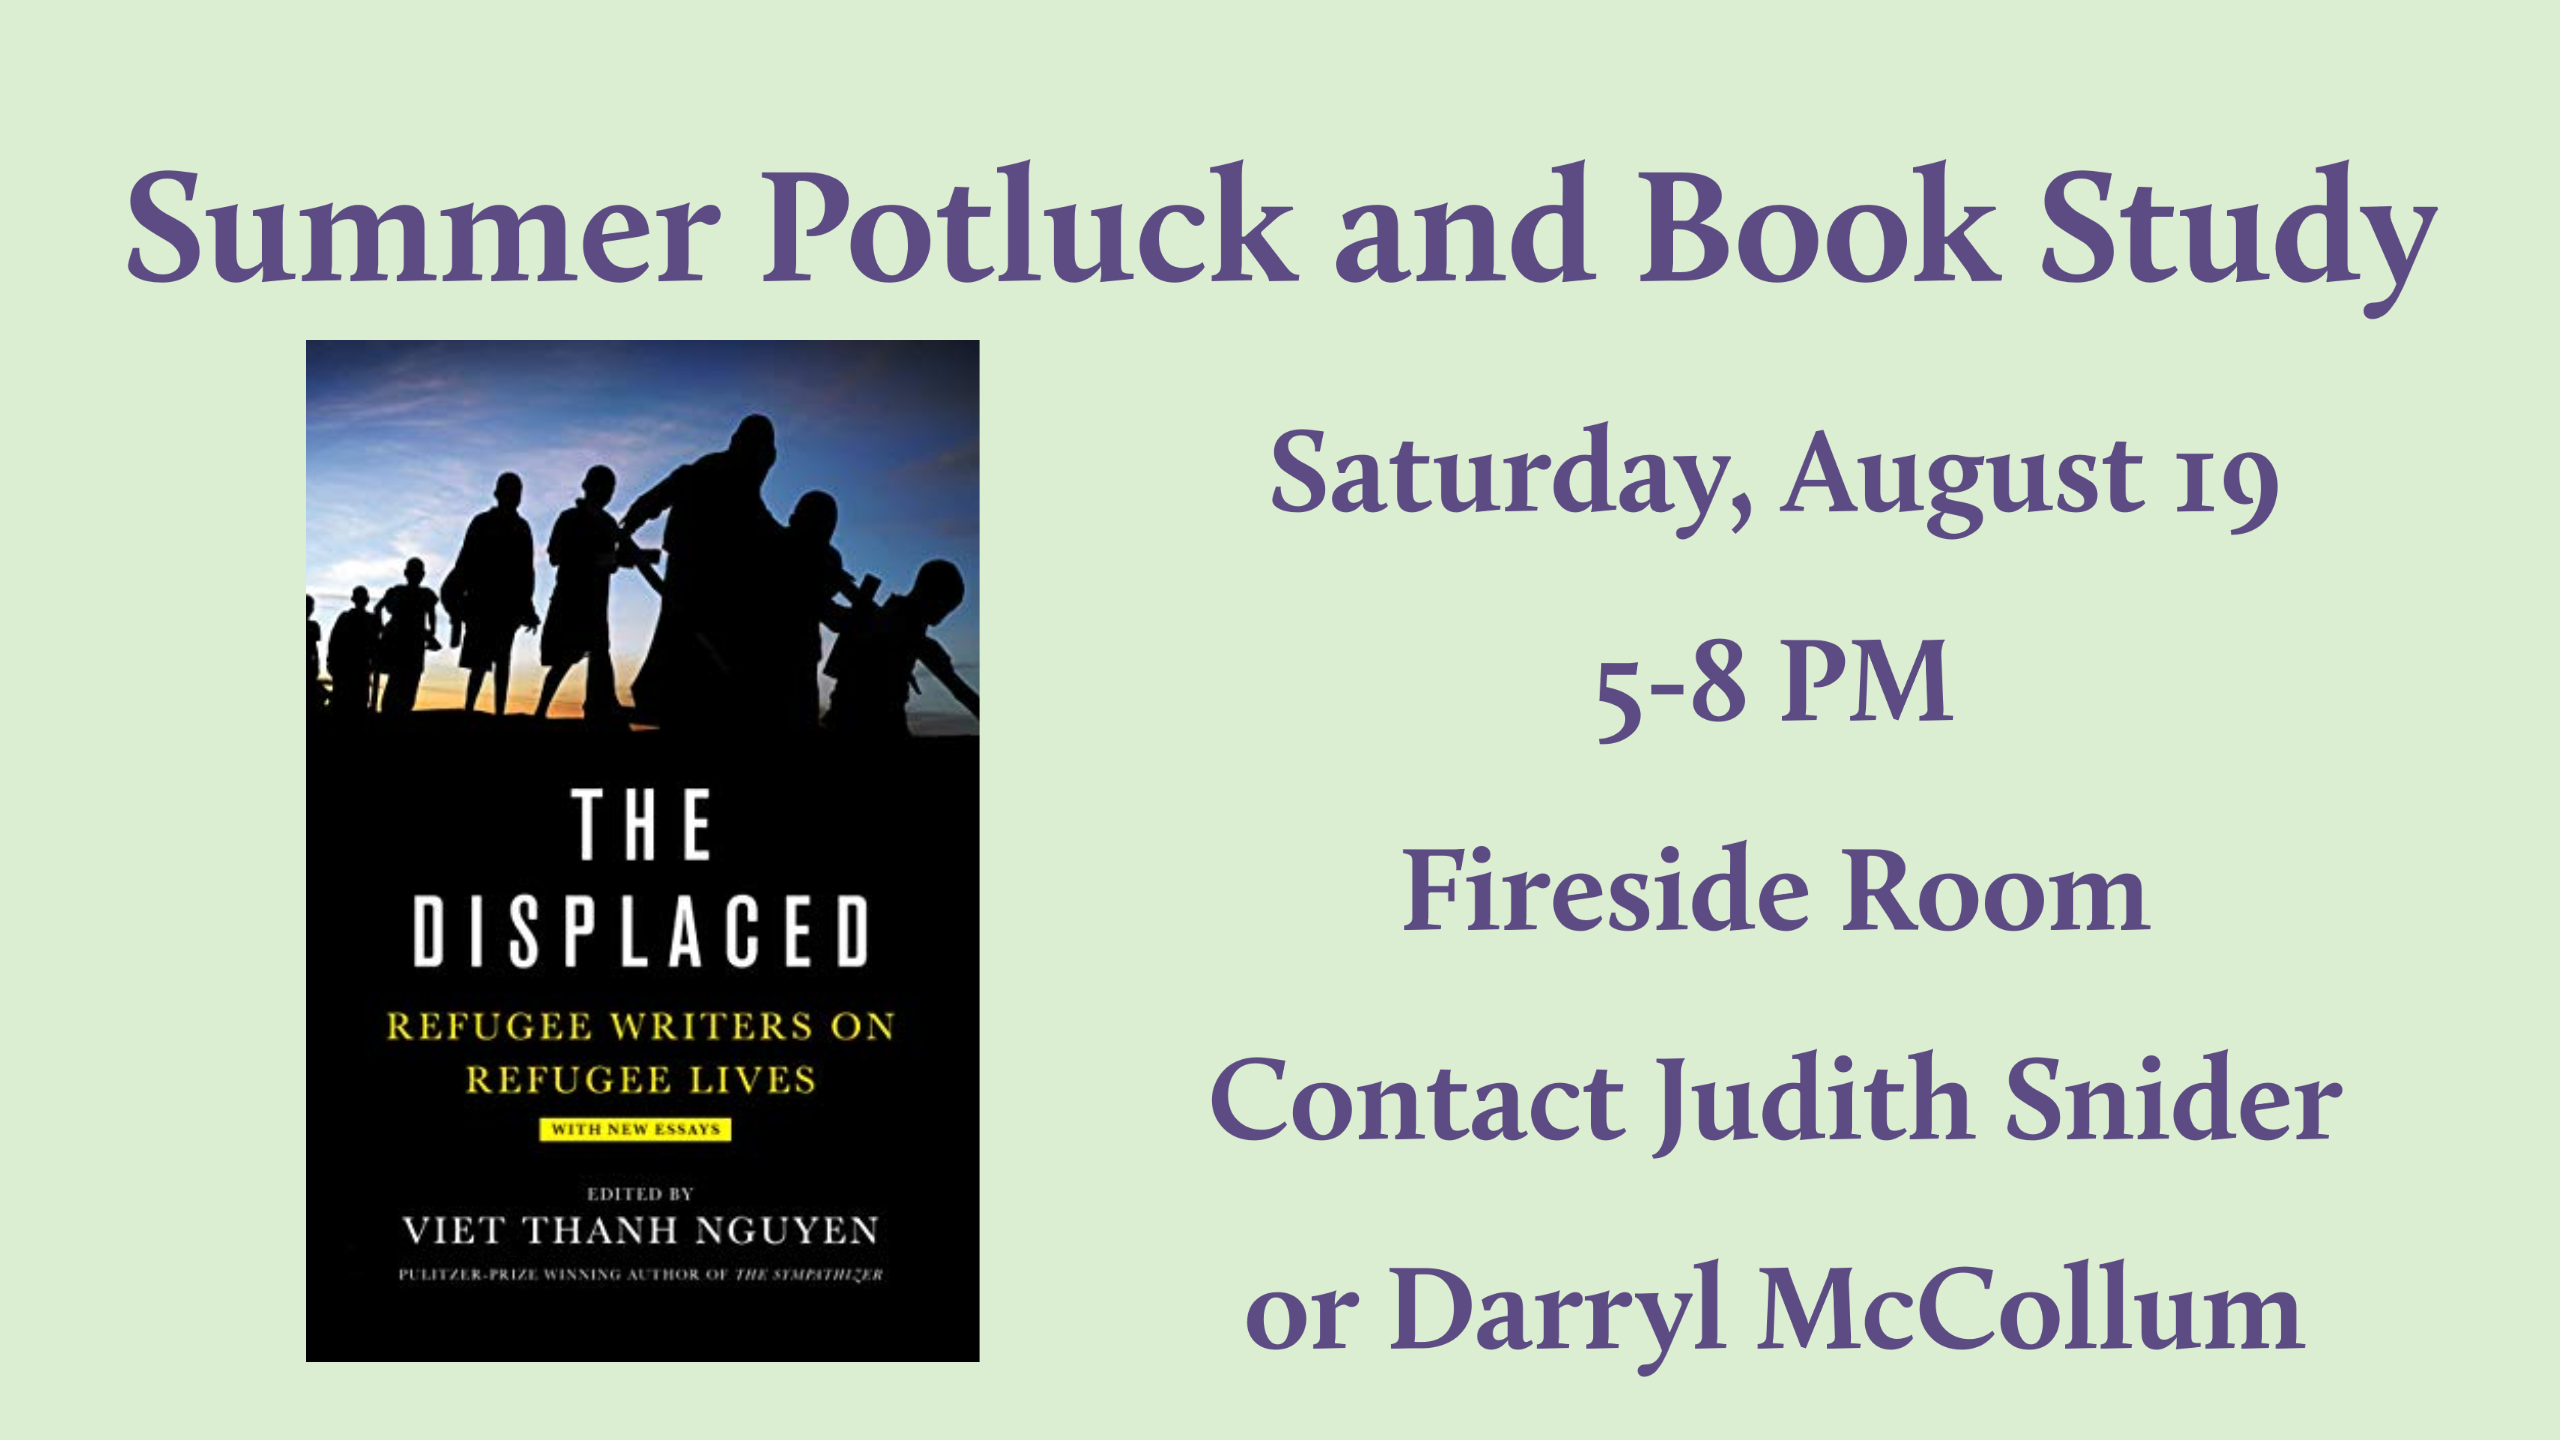 purple text on a green background reading "Summer Potluck and Book Study Saturday, August 19 5-8 PM Fireside Room Contact Judith Snider or Darryl McCollum" with the cover of The Displaced